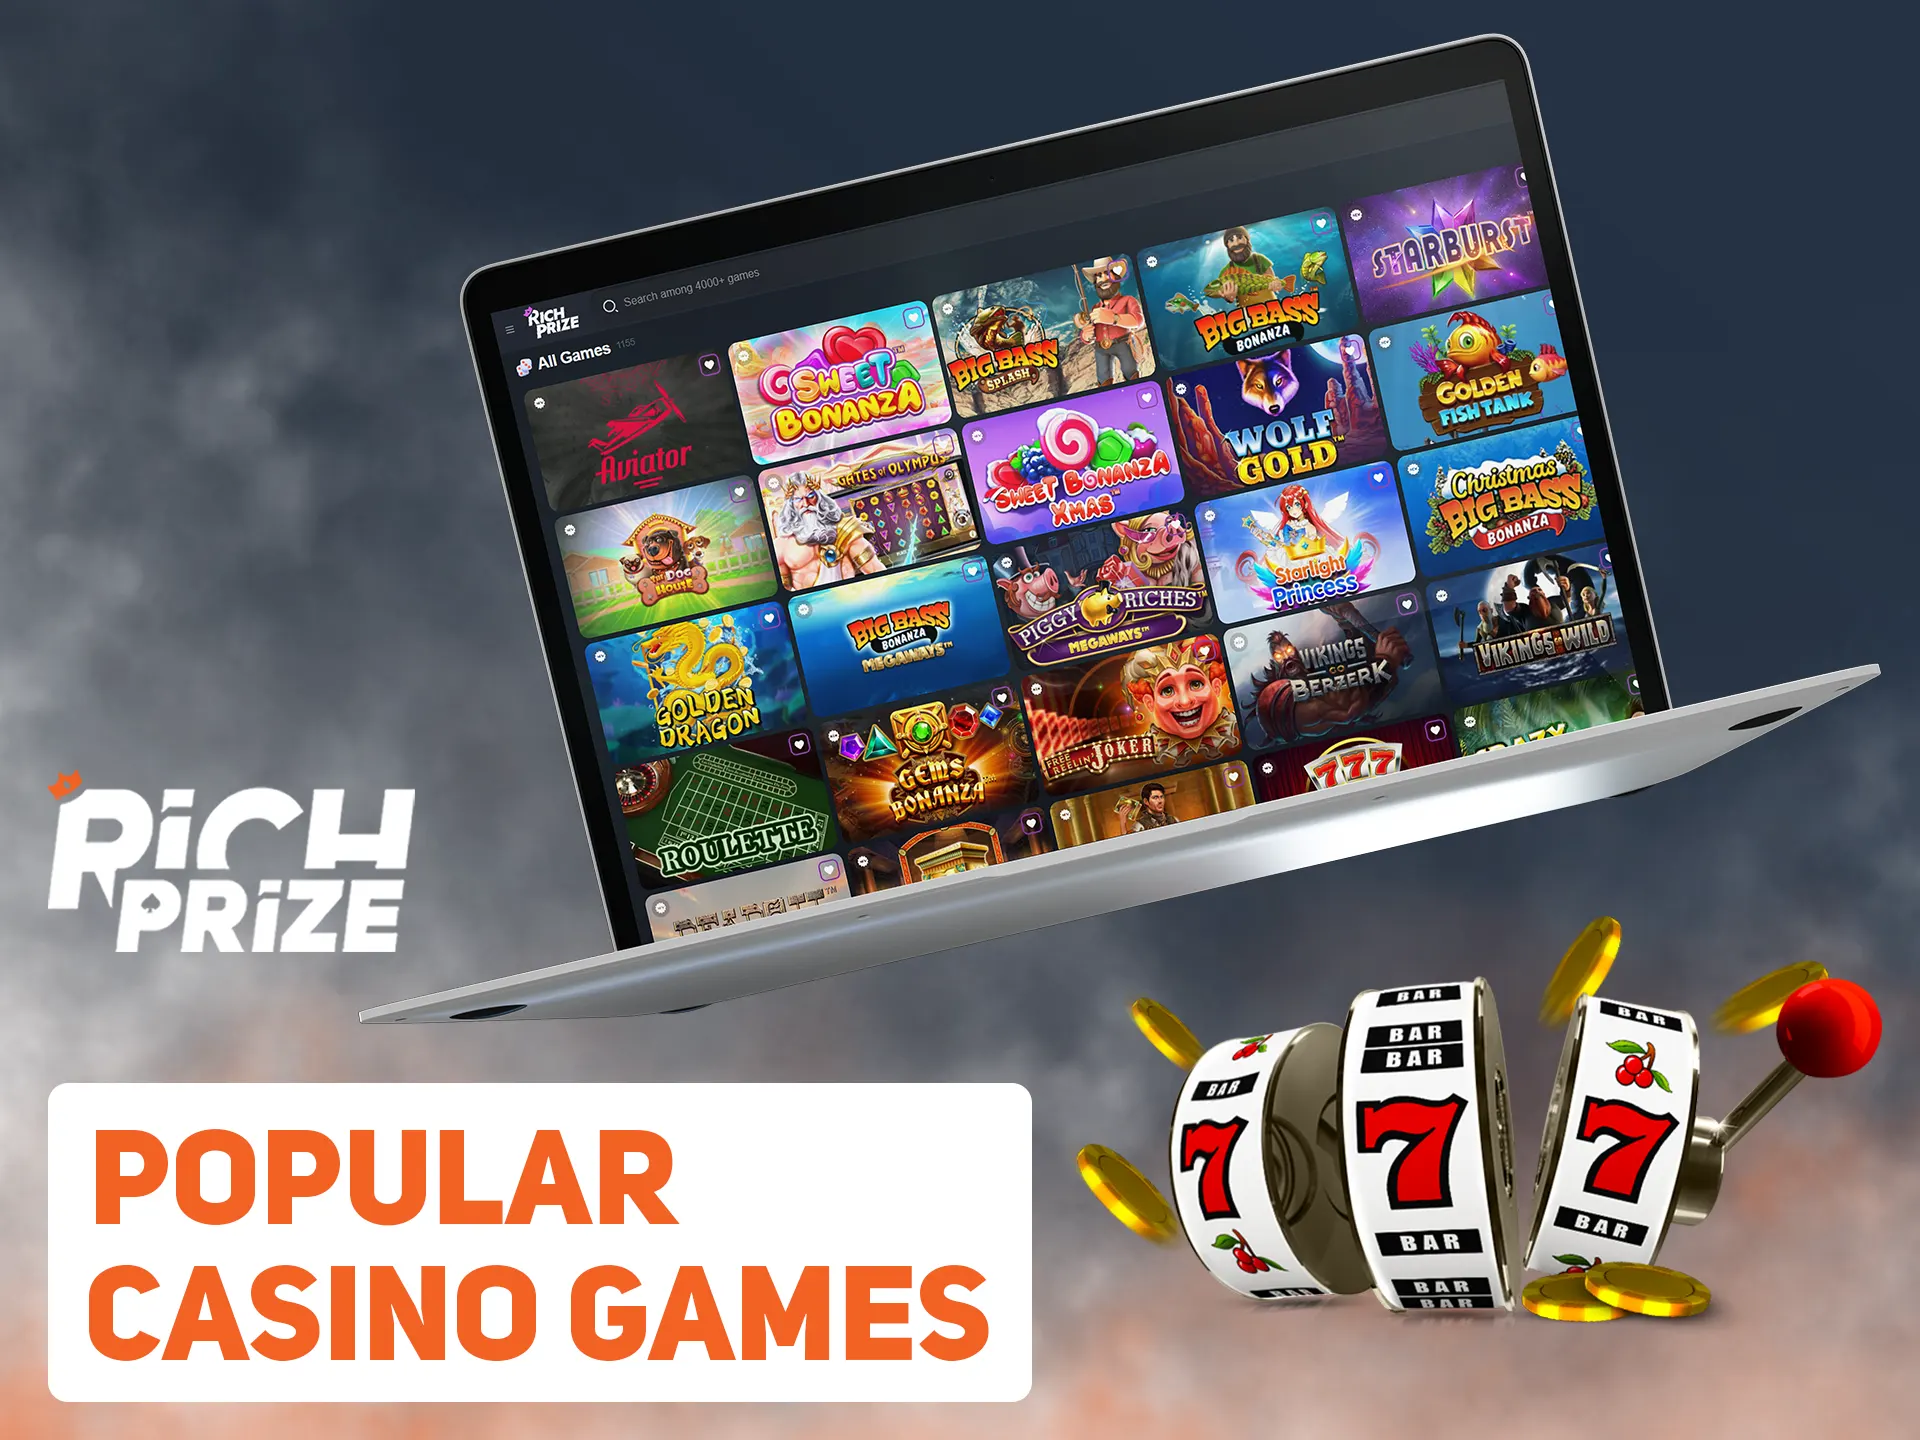 Search for your favourite casino games at Richprize.